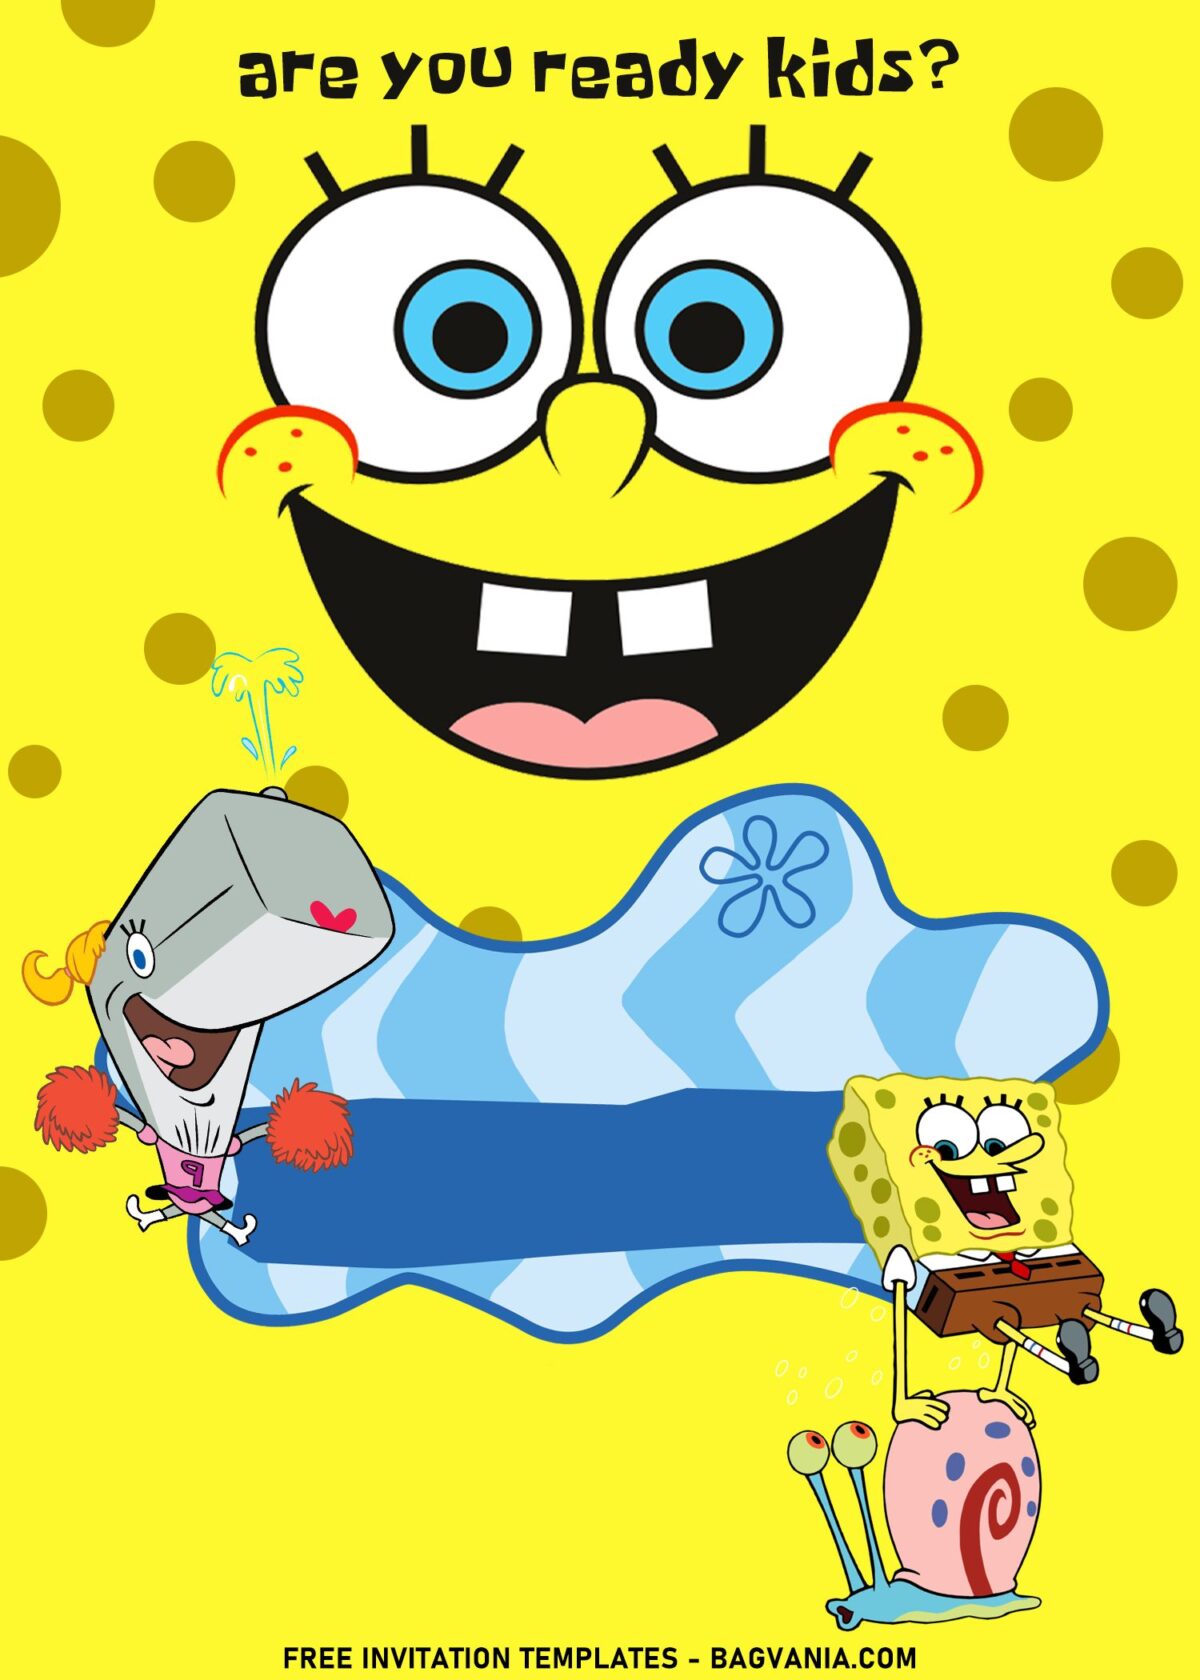 11+ Bright And Colorful SpongeBob Birthday Invitation Templates with Pearl the cheerleader and SpongeBob is playing with Gary